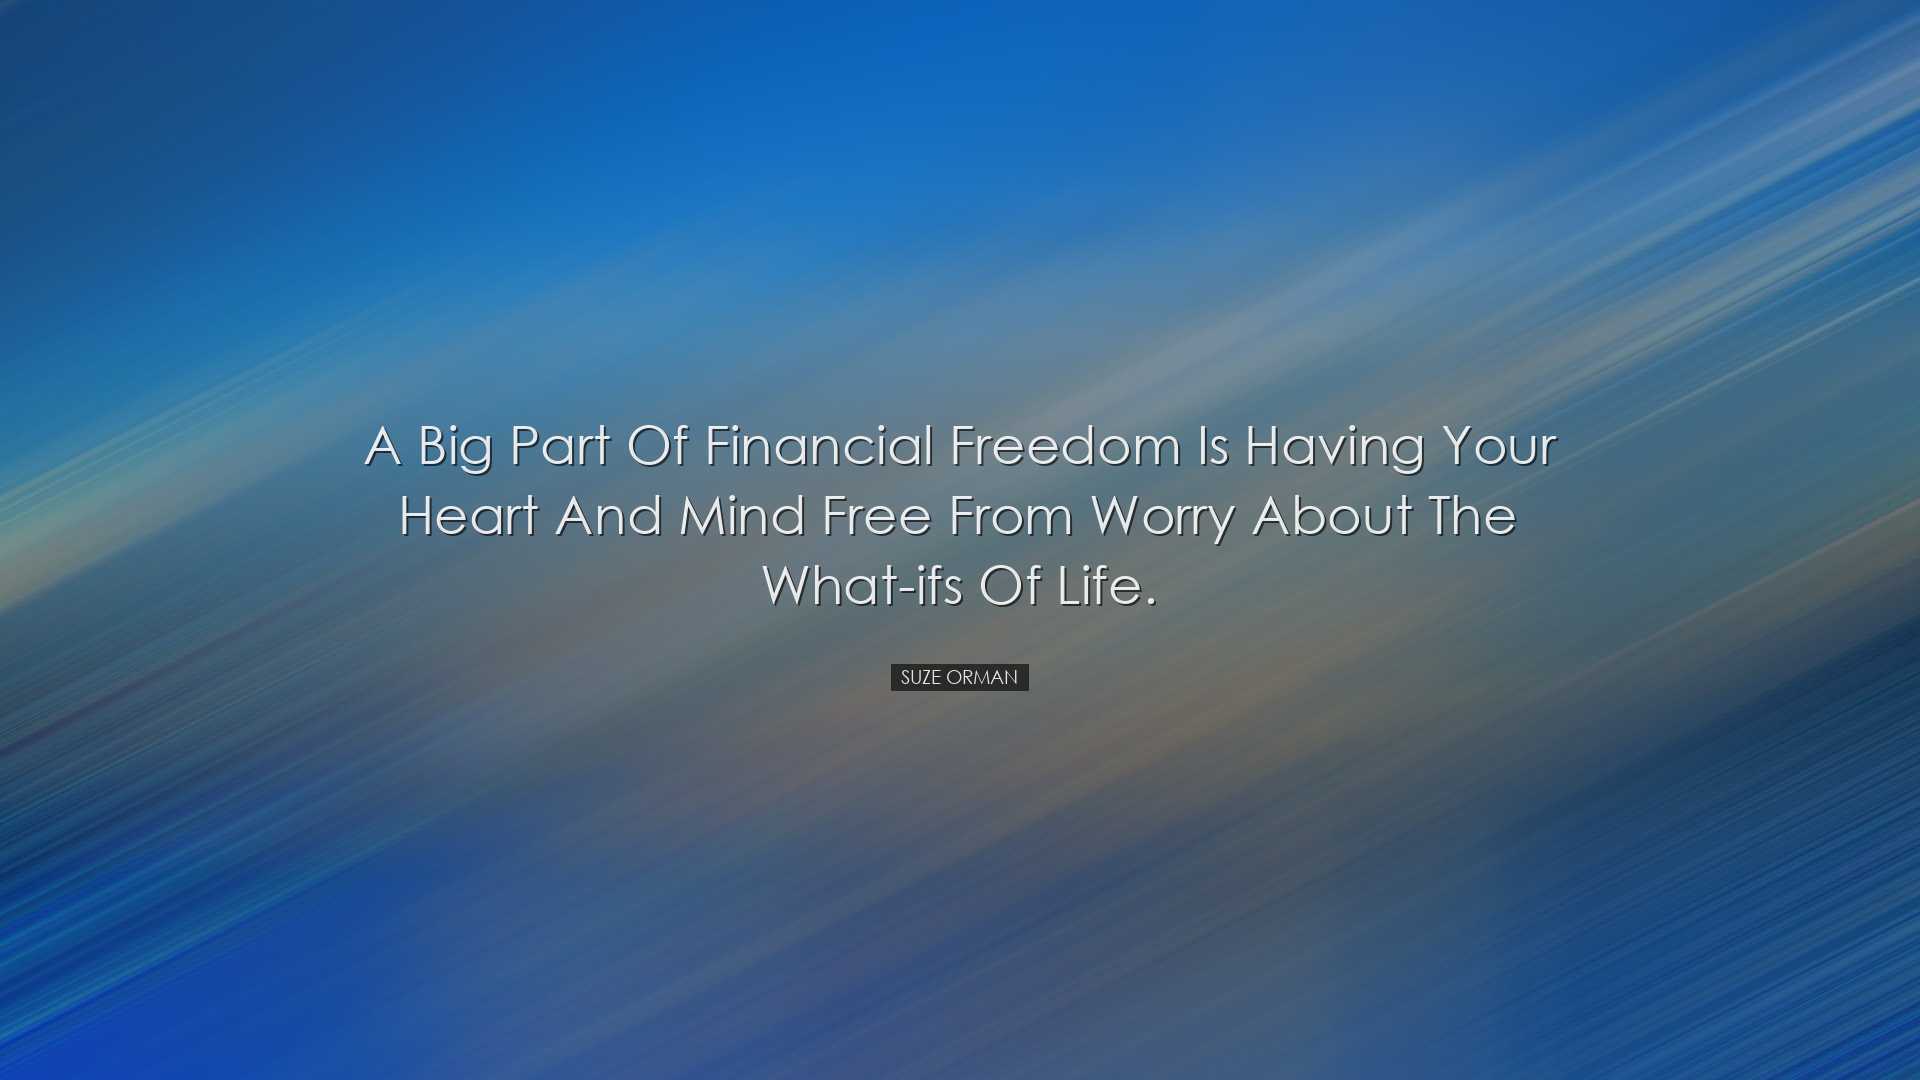 A big part of financial freedom is having your heart and mind free